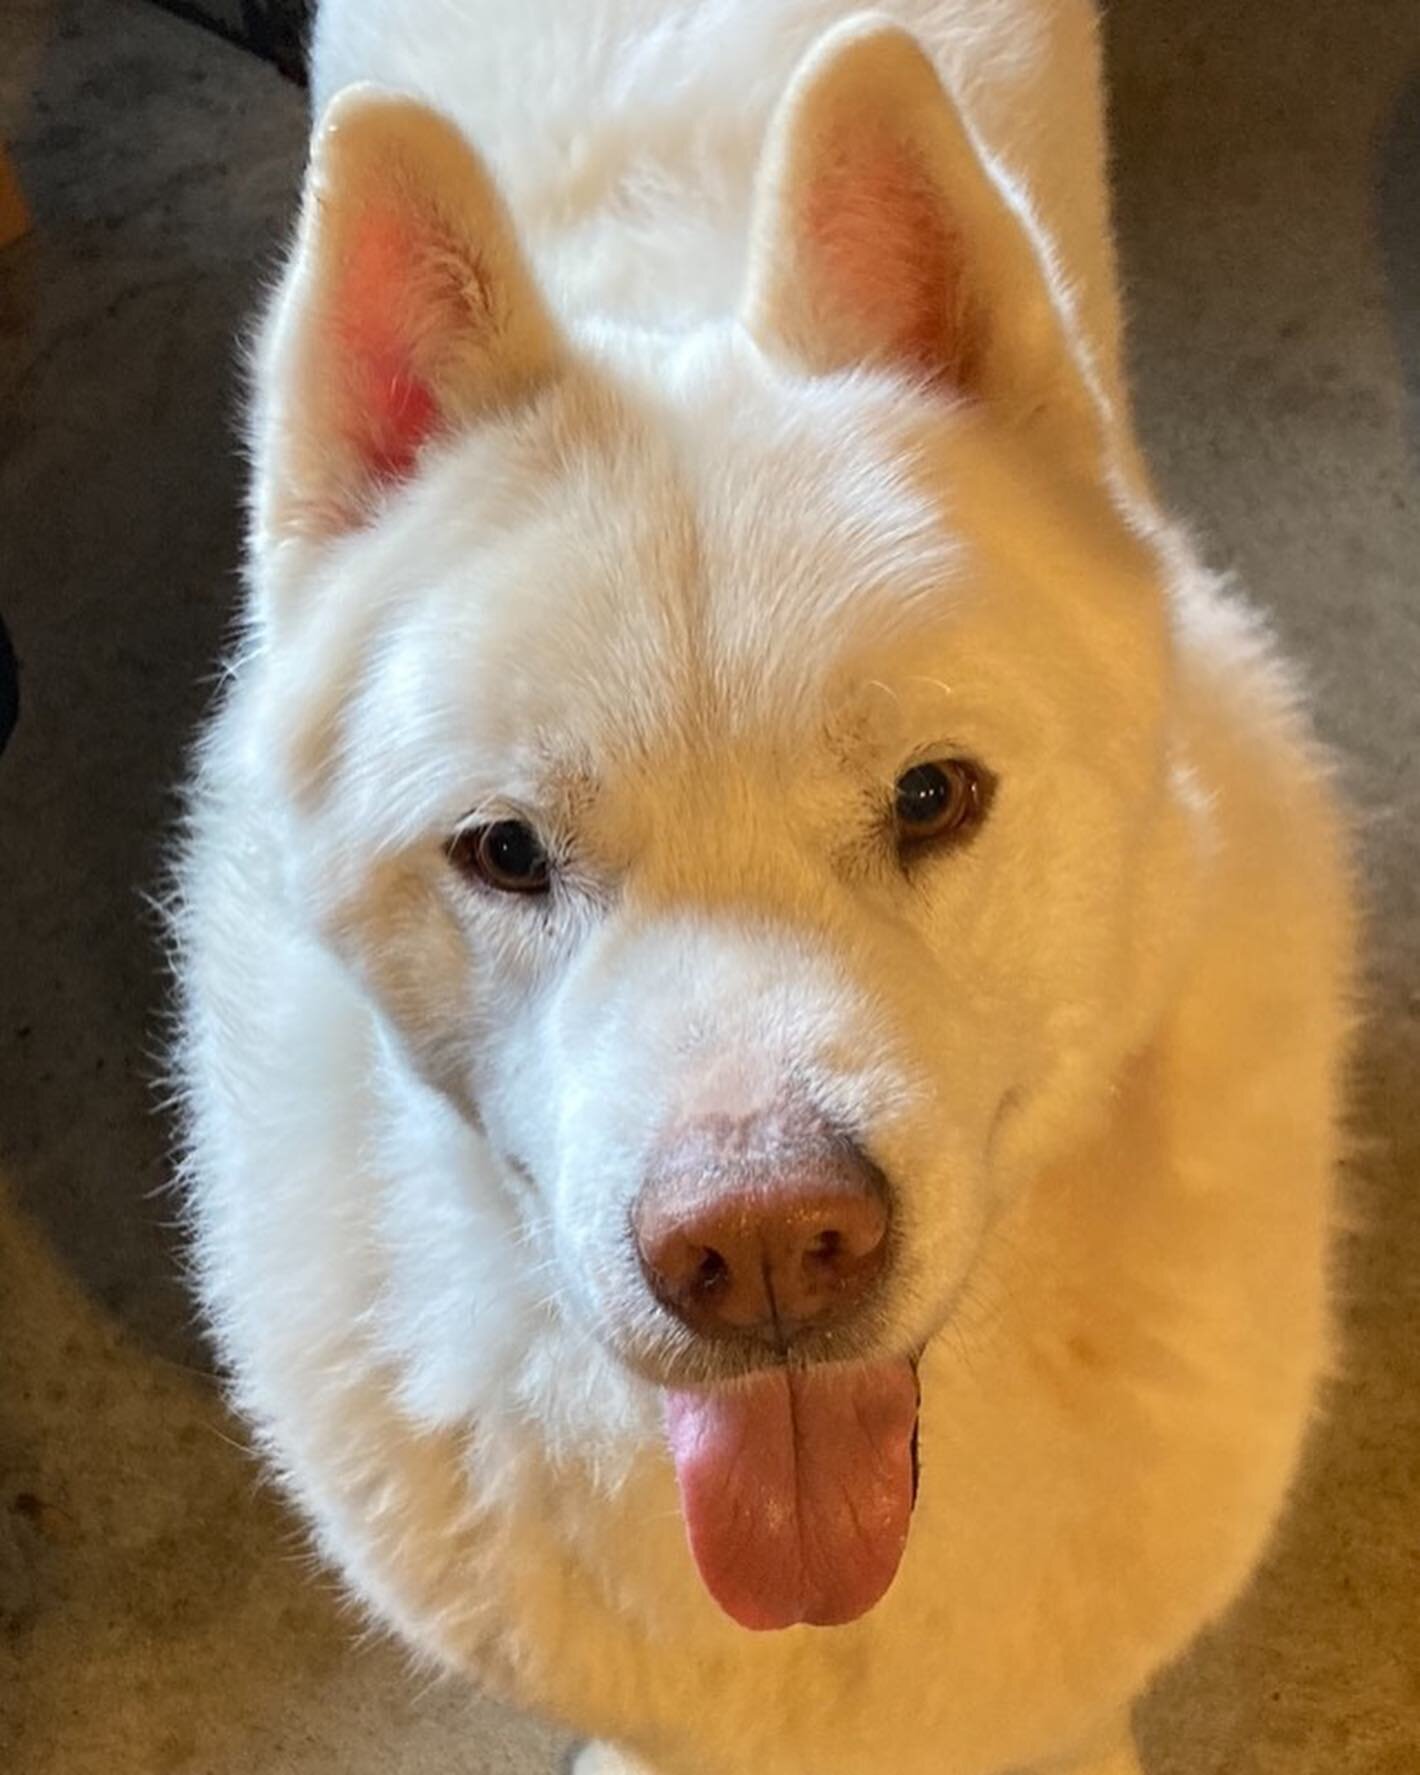 ✨Meet Shadow✨

Hi, I&rsquo;m Shadow! I&rsquo;m an adoptable foster looking for my forever home. Here&rsquo;s a bit about me:
I&rsquo;m a 9 year old fixed male Siberian husky. My pervious owners were elderly and unable to care for me so I spent most o